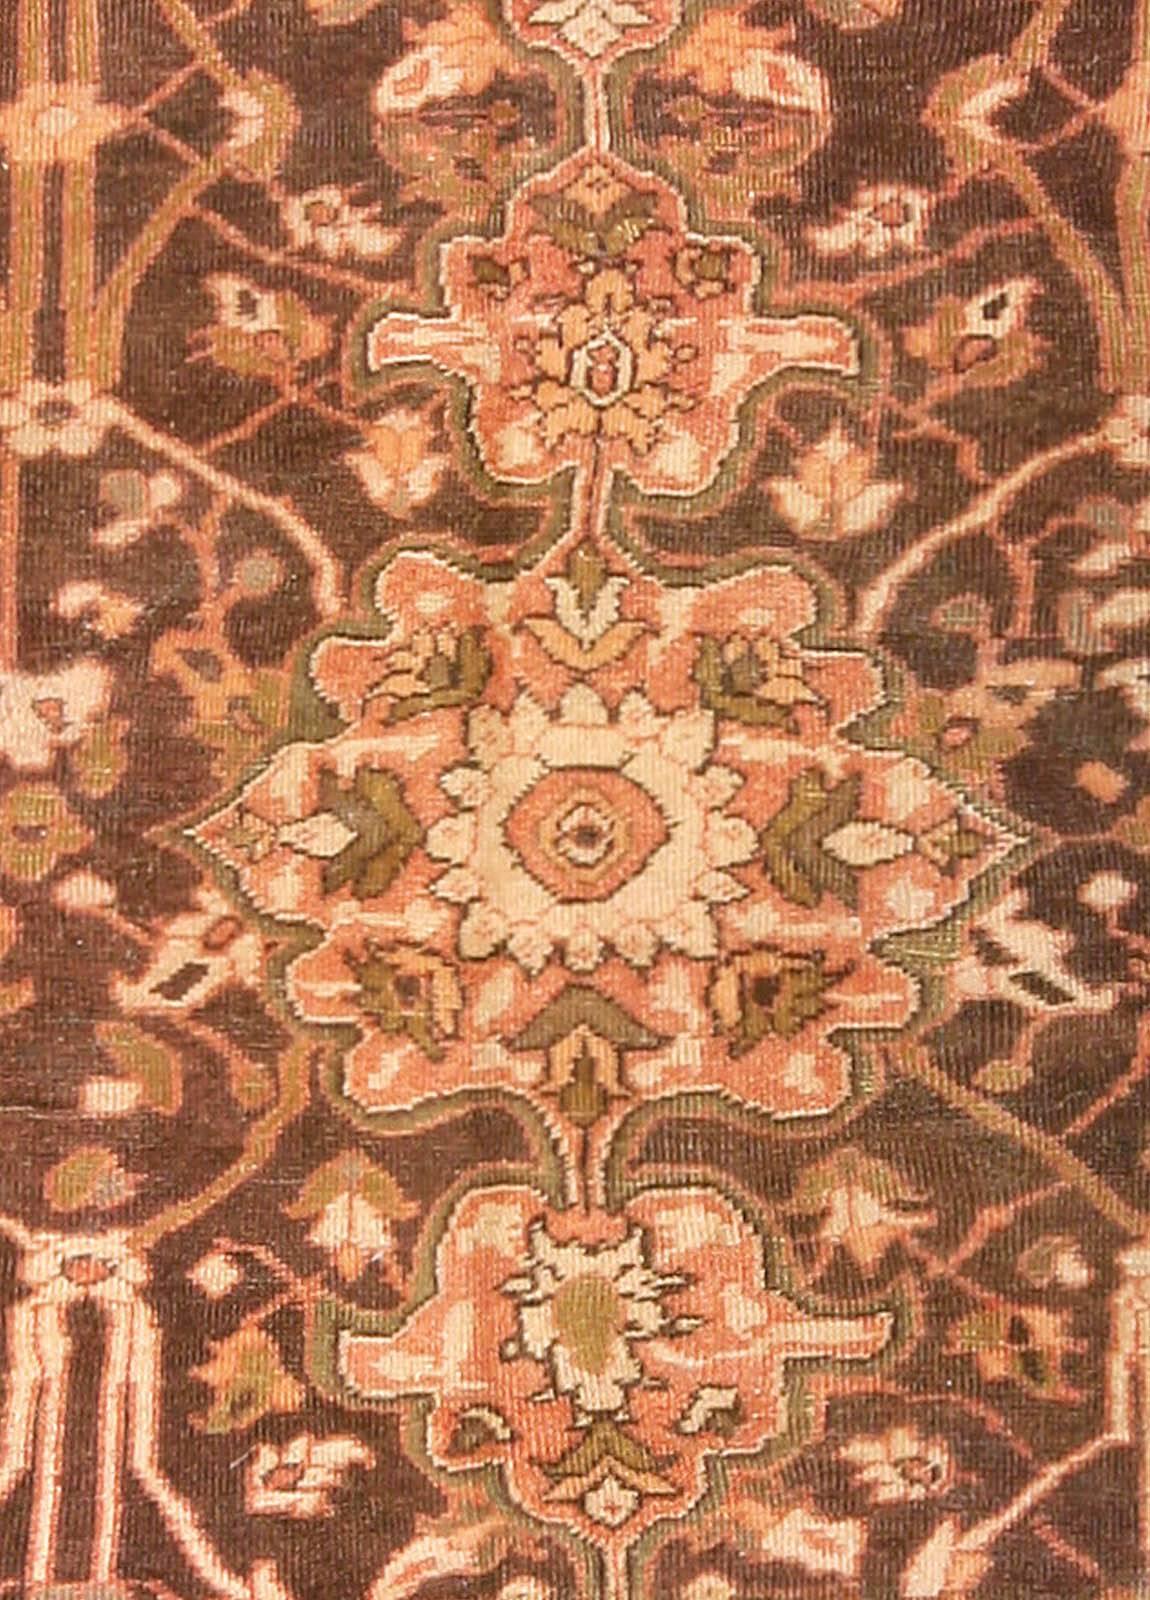 Authentic 19th Century Persian Sultanabad brown handmade wool rug
Size: 9'0